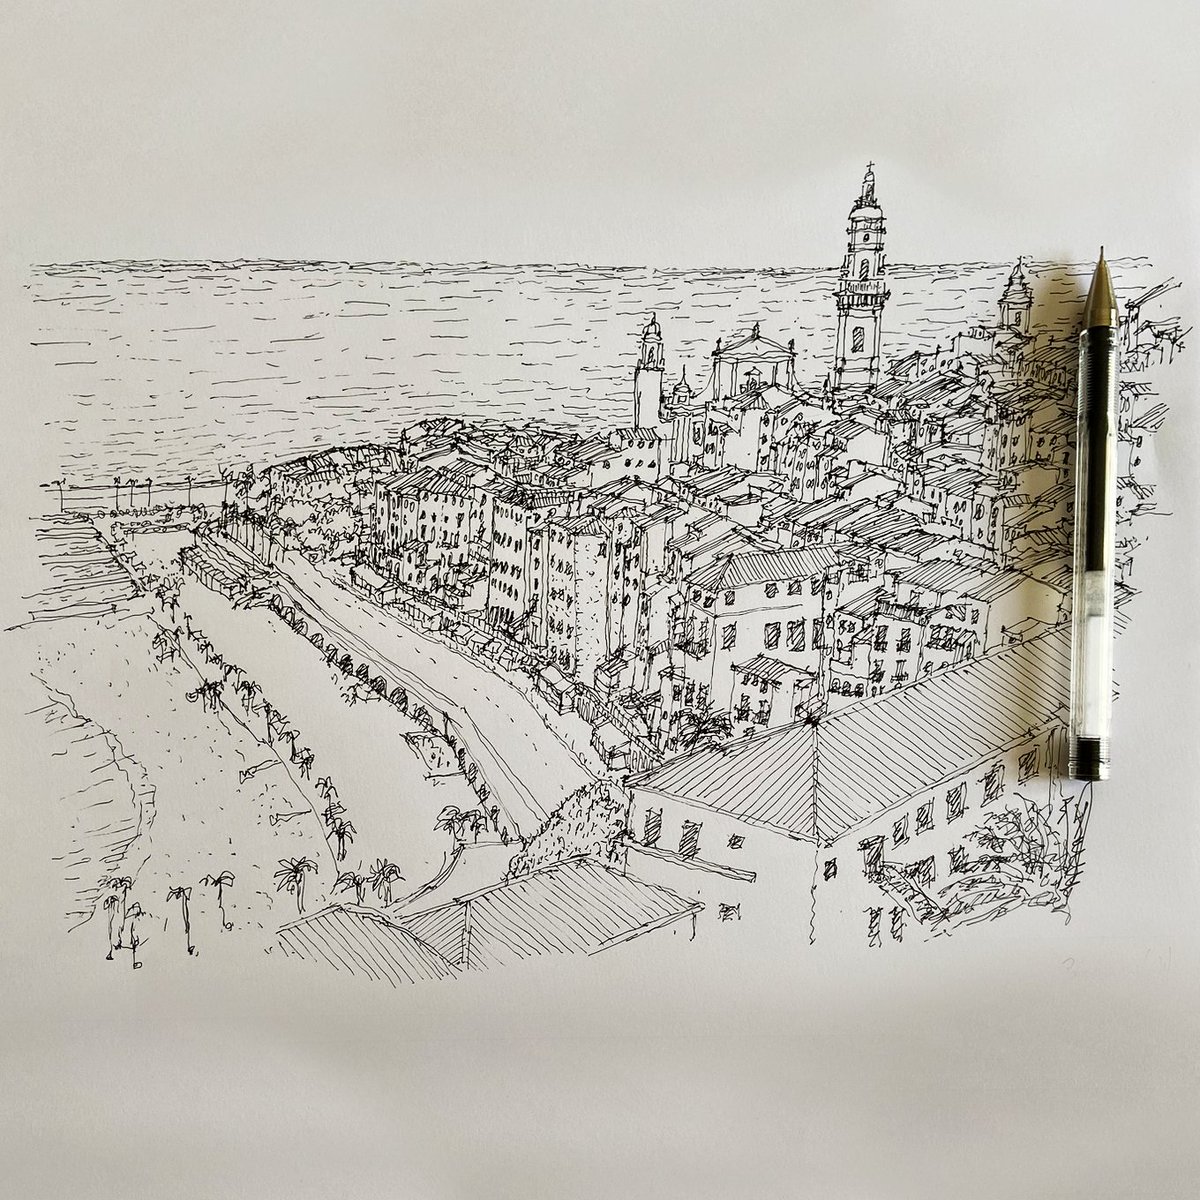 Menton panoramic view. At the bottom level, the Plage des Sablettes, all the way up to the Saint-Michel Archange Basilica. #PlagedesSablettes #Menton #MentonFrance #CoteDAzur #France #InkDrawing #SketchDaily #Sketch #Drawing #Pendrawing #Drawingoftheday #Sketchoftheday